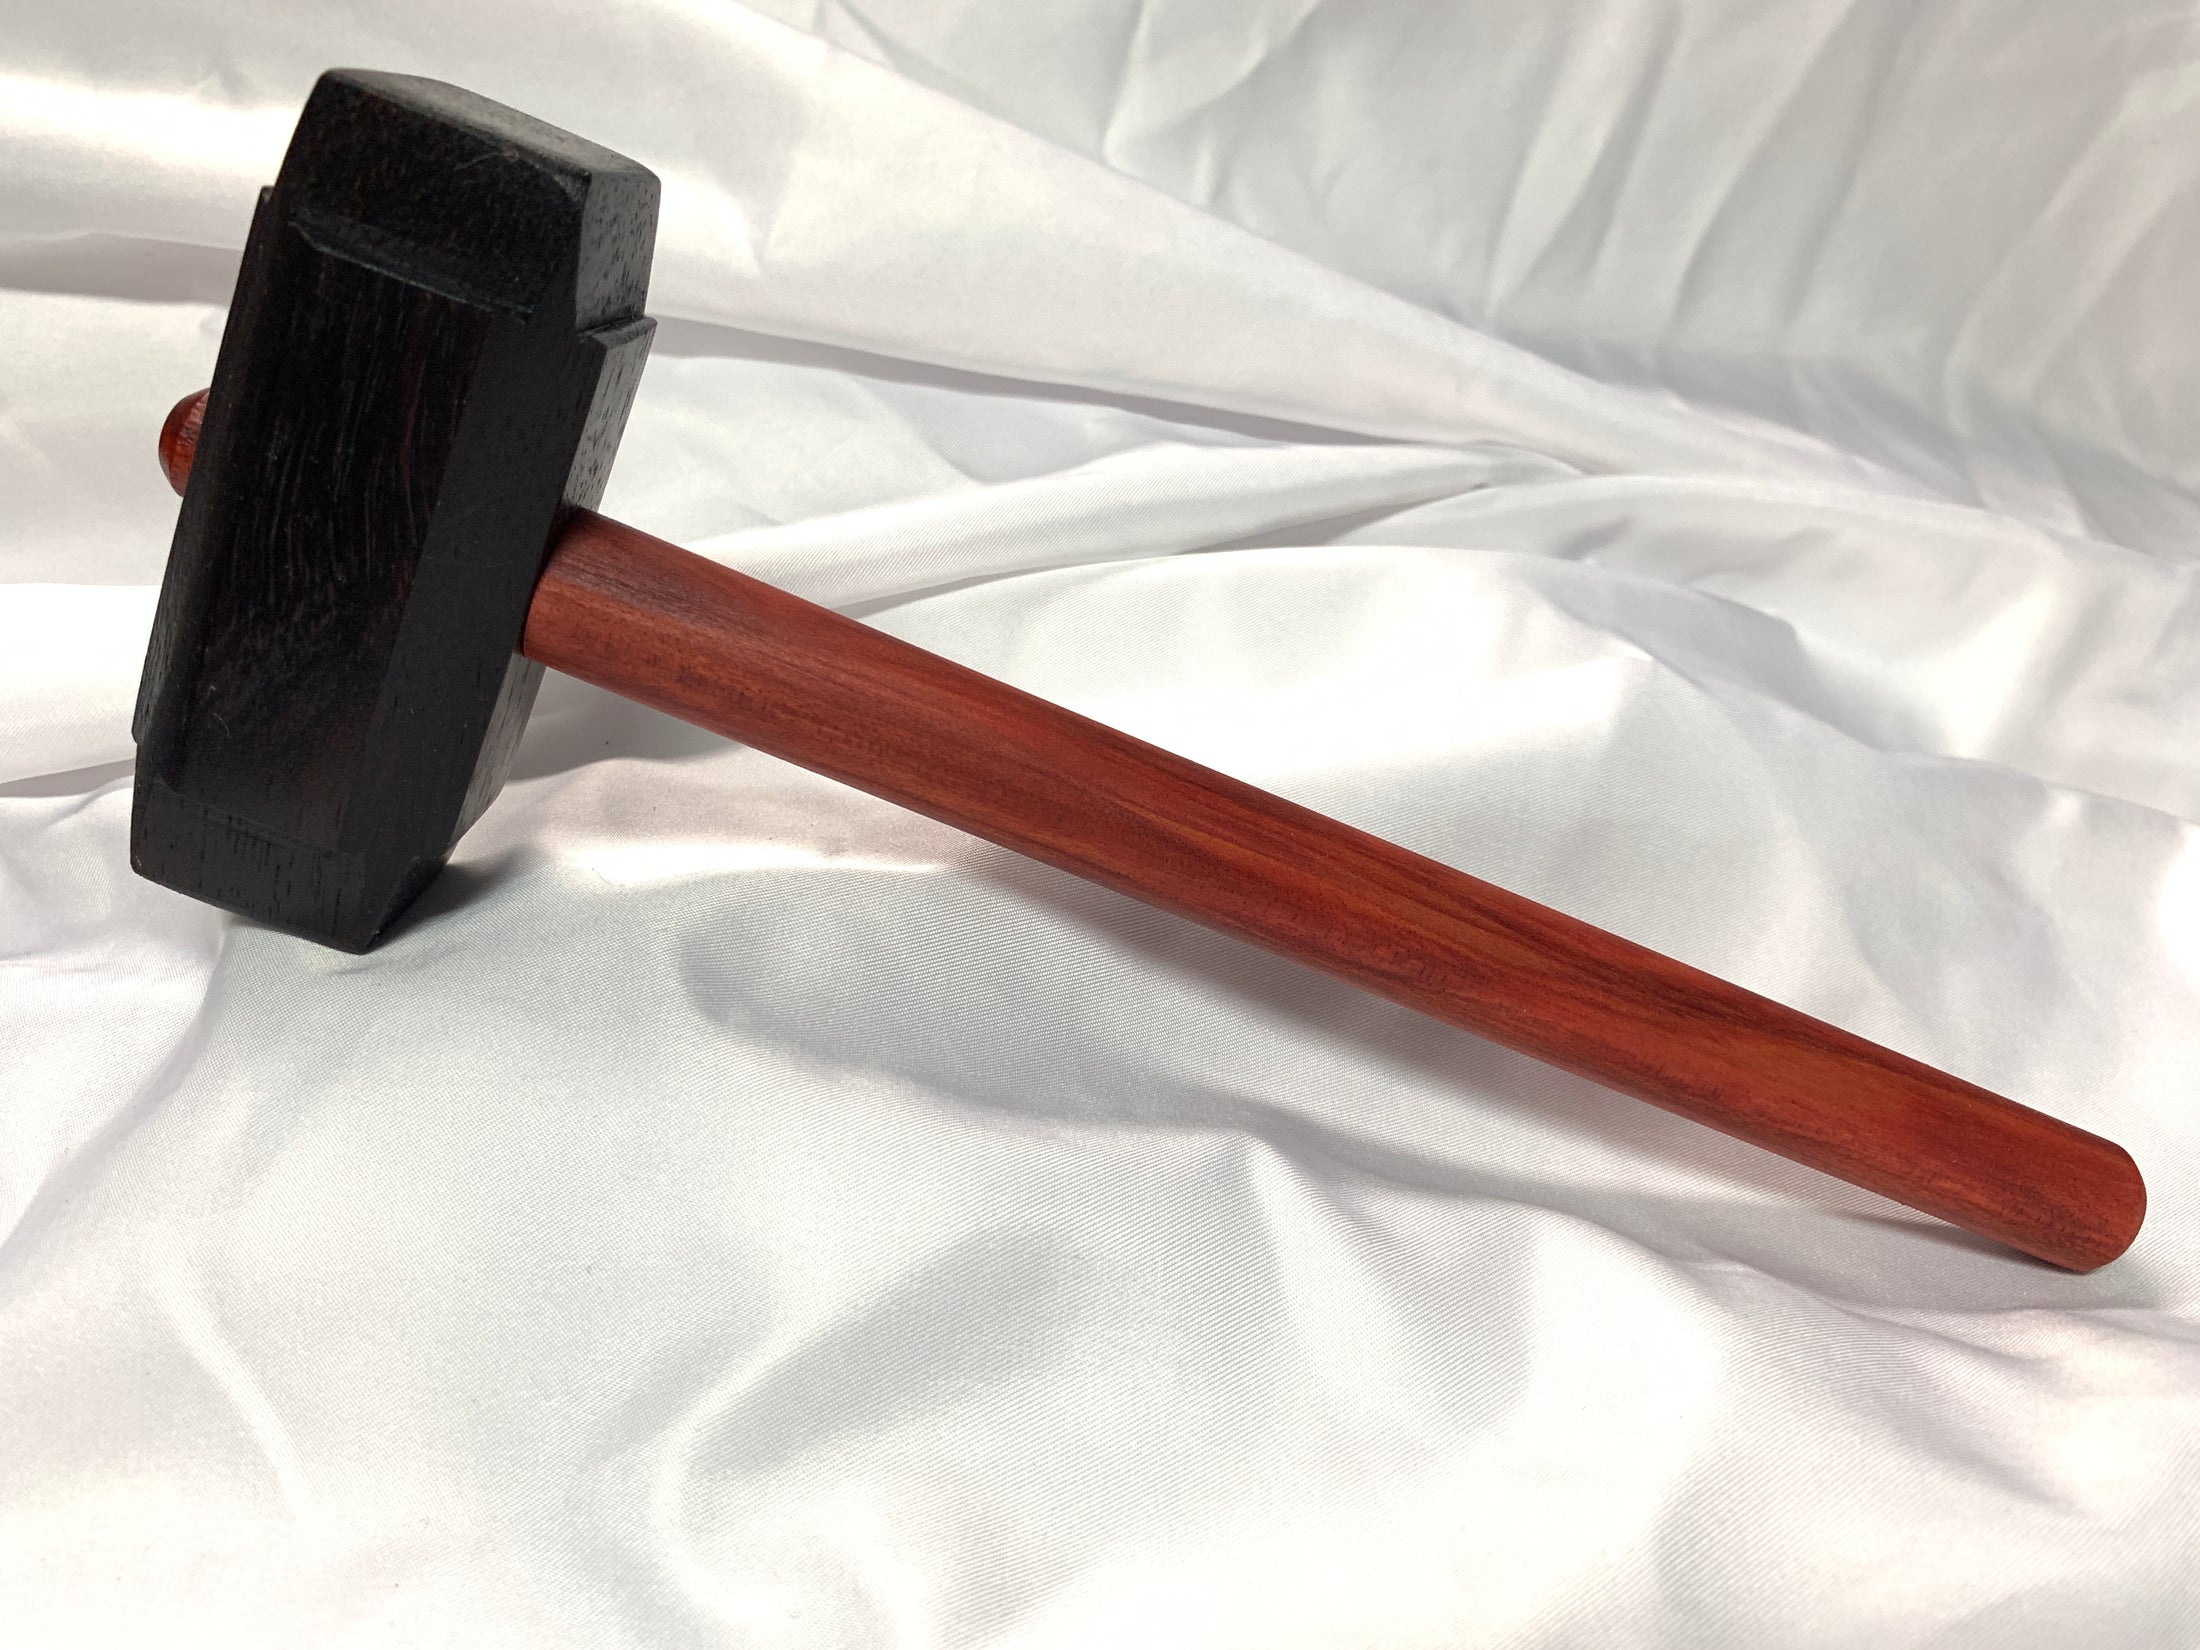 Thors Hammer Woodworking Mallet East Indian Rosewood Head with Redheart Handle Kings Fine Woodworking